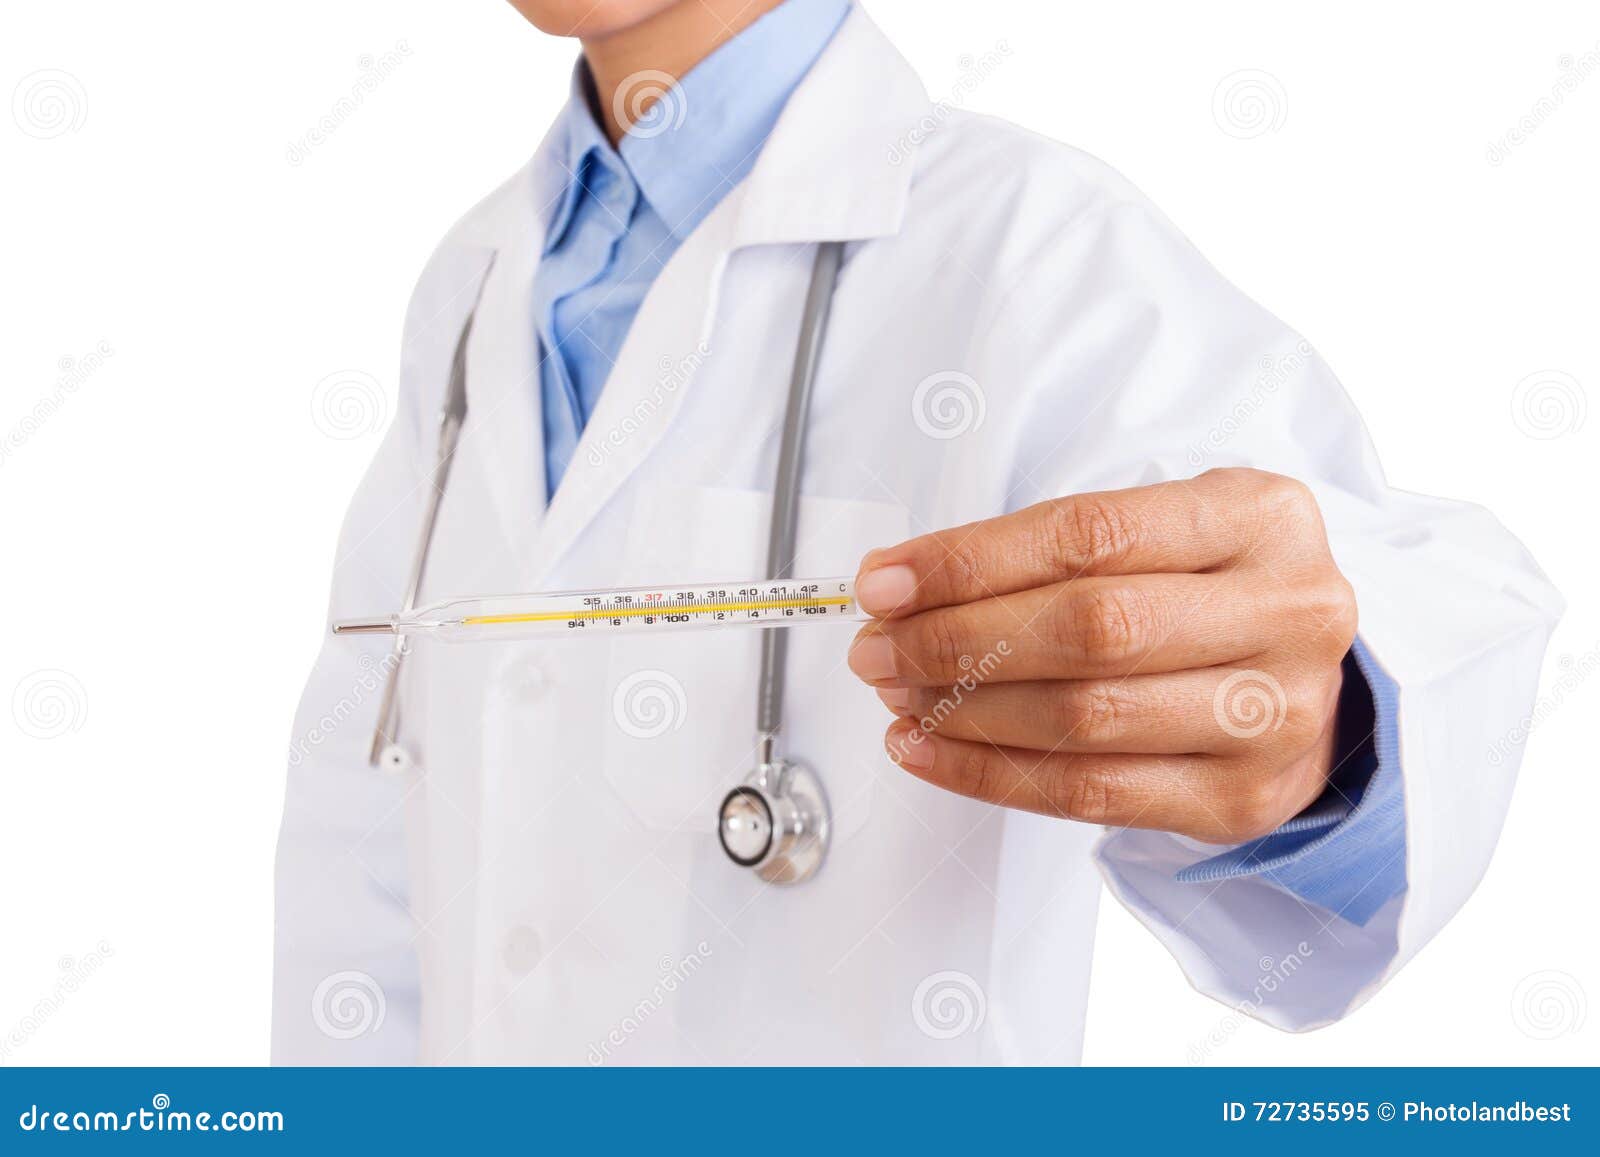 Female doctor holding thermometer with stethoscope.on white background